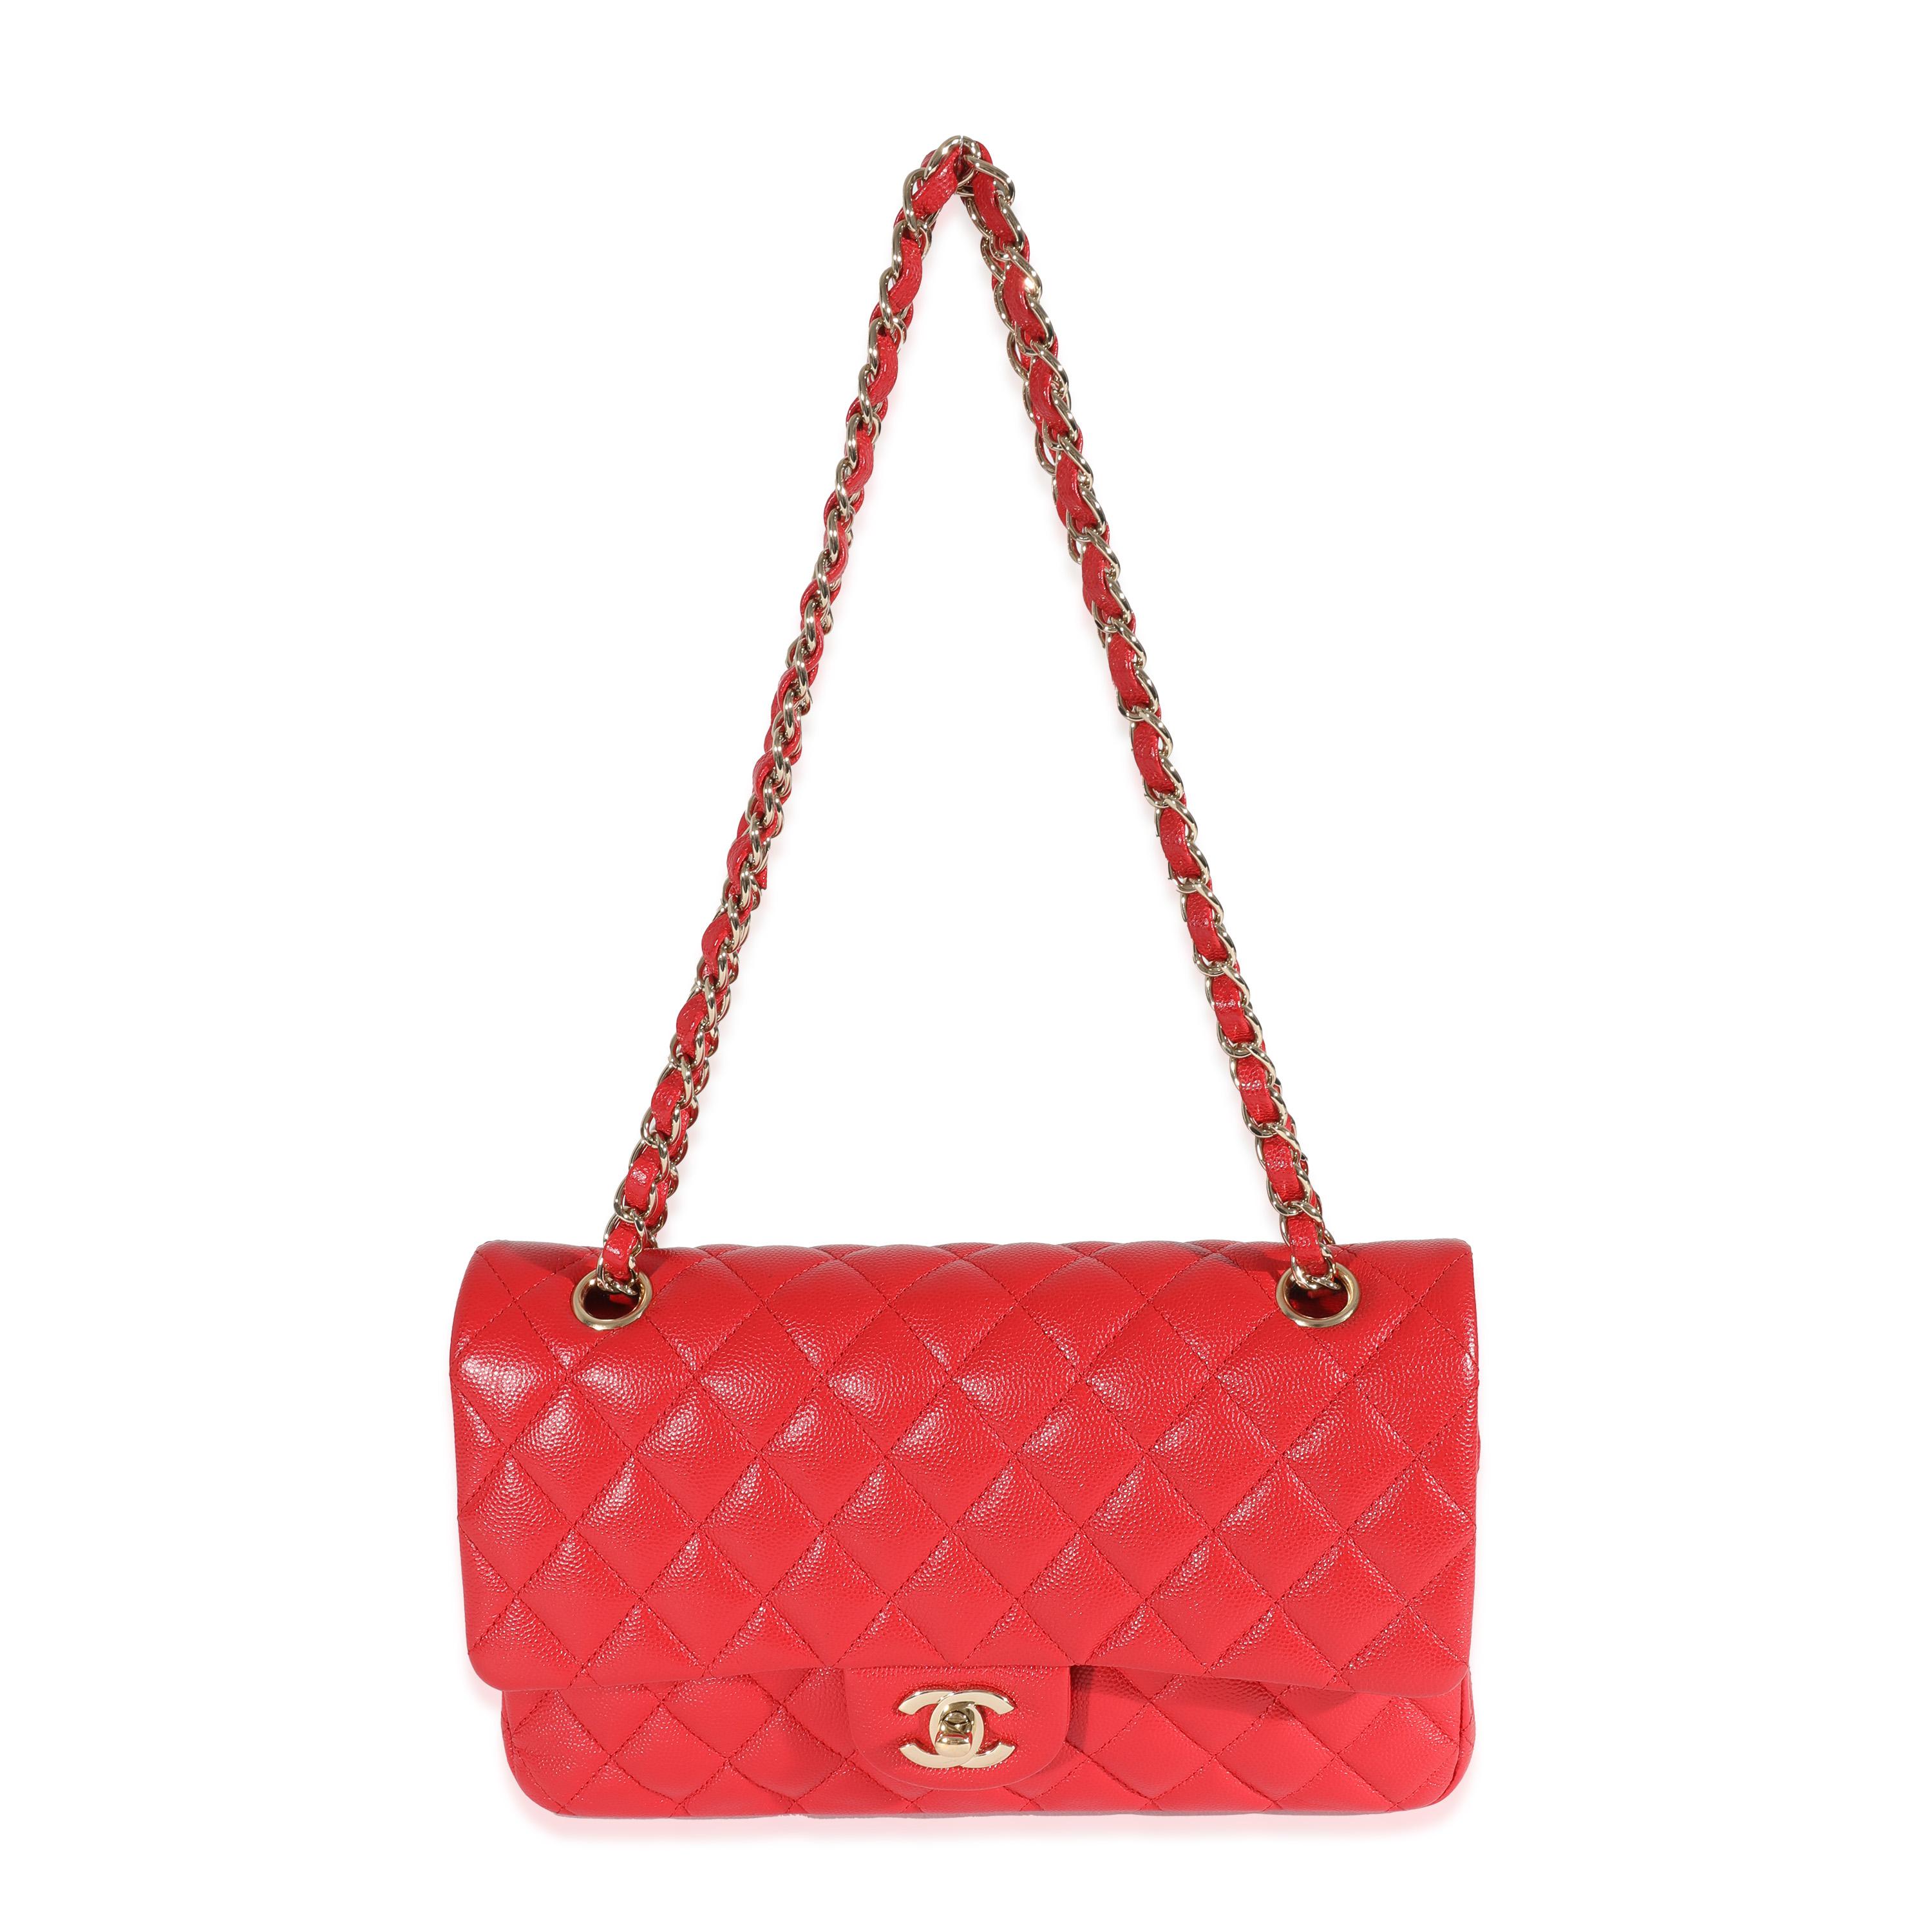 Listing Title: Chanel 21S Red Caviar Medium Classic Double Flap
SKU: 129867
Condition: Pre-owned 
Condition Description: A timeless classic that never goes out of style, the flap bag from Chanel dates back to 1955 and has seen a number of updates.